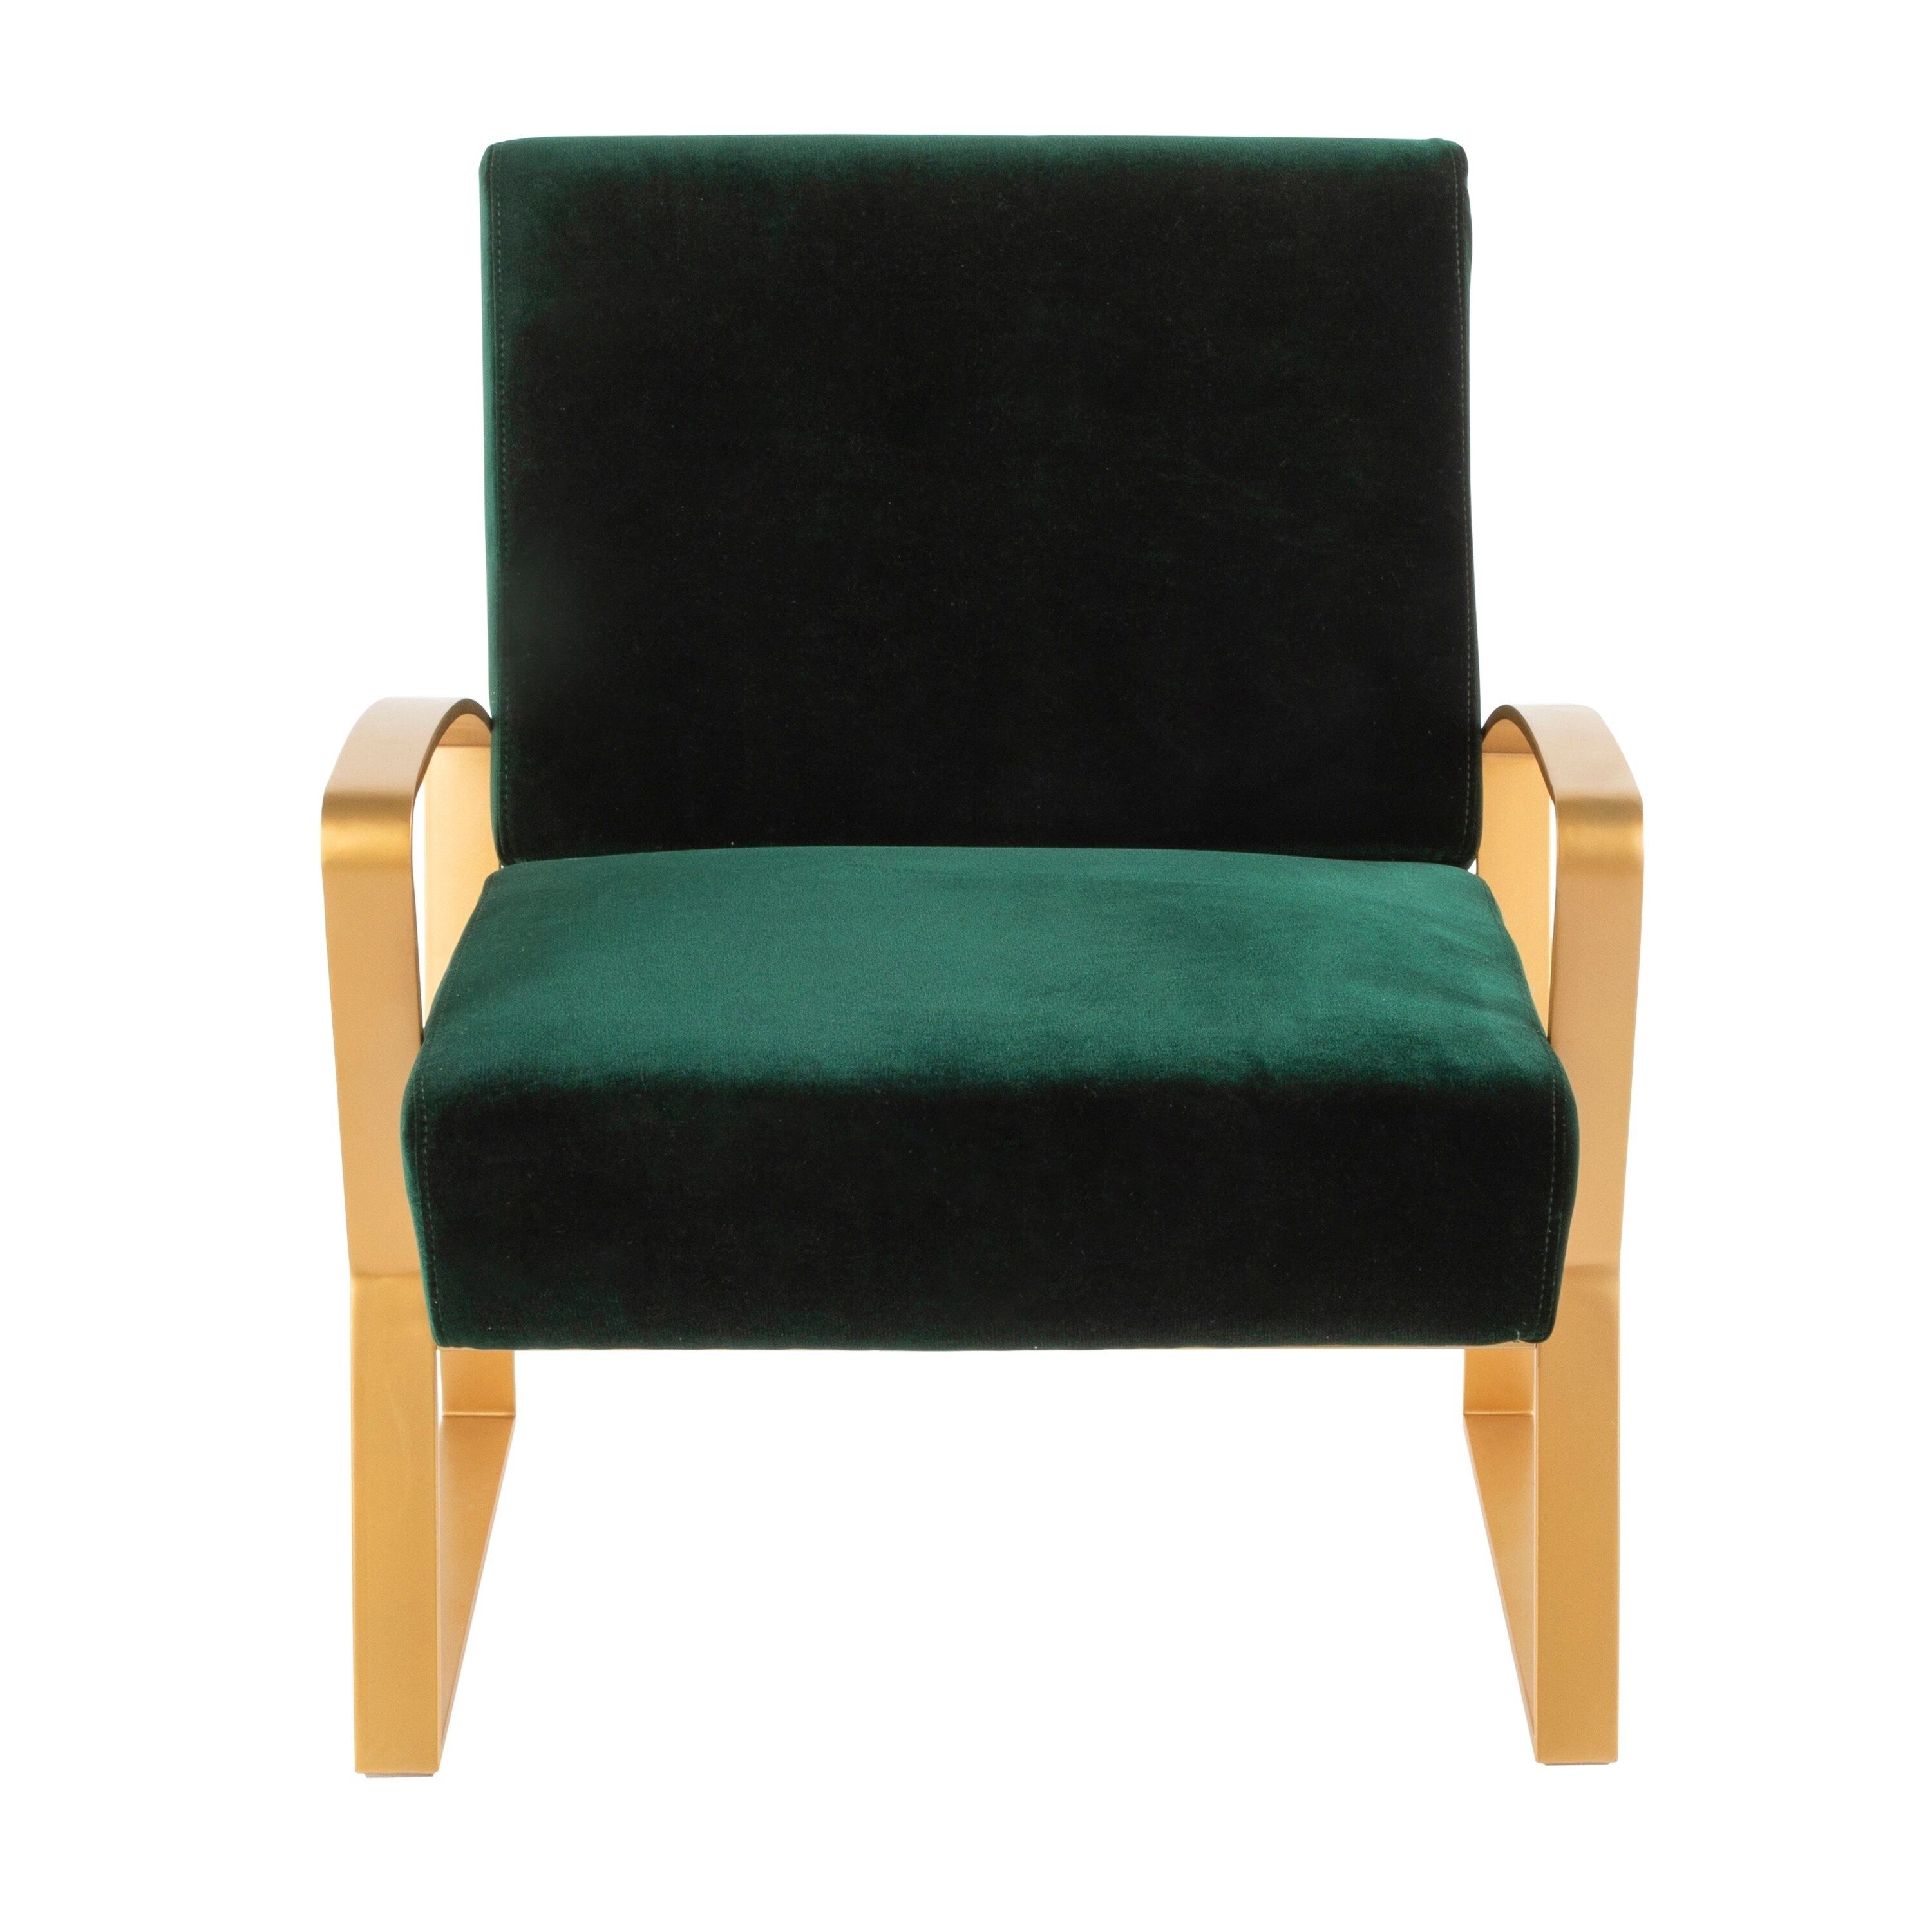 Henley Contemporary-Glam Lounge Chair in Metal and Velvet Fabric - Green | Bed Bath & Beyond